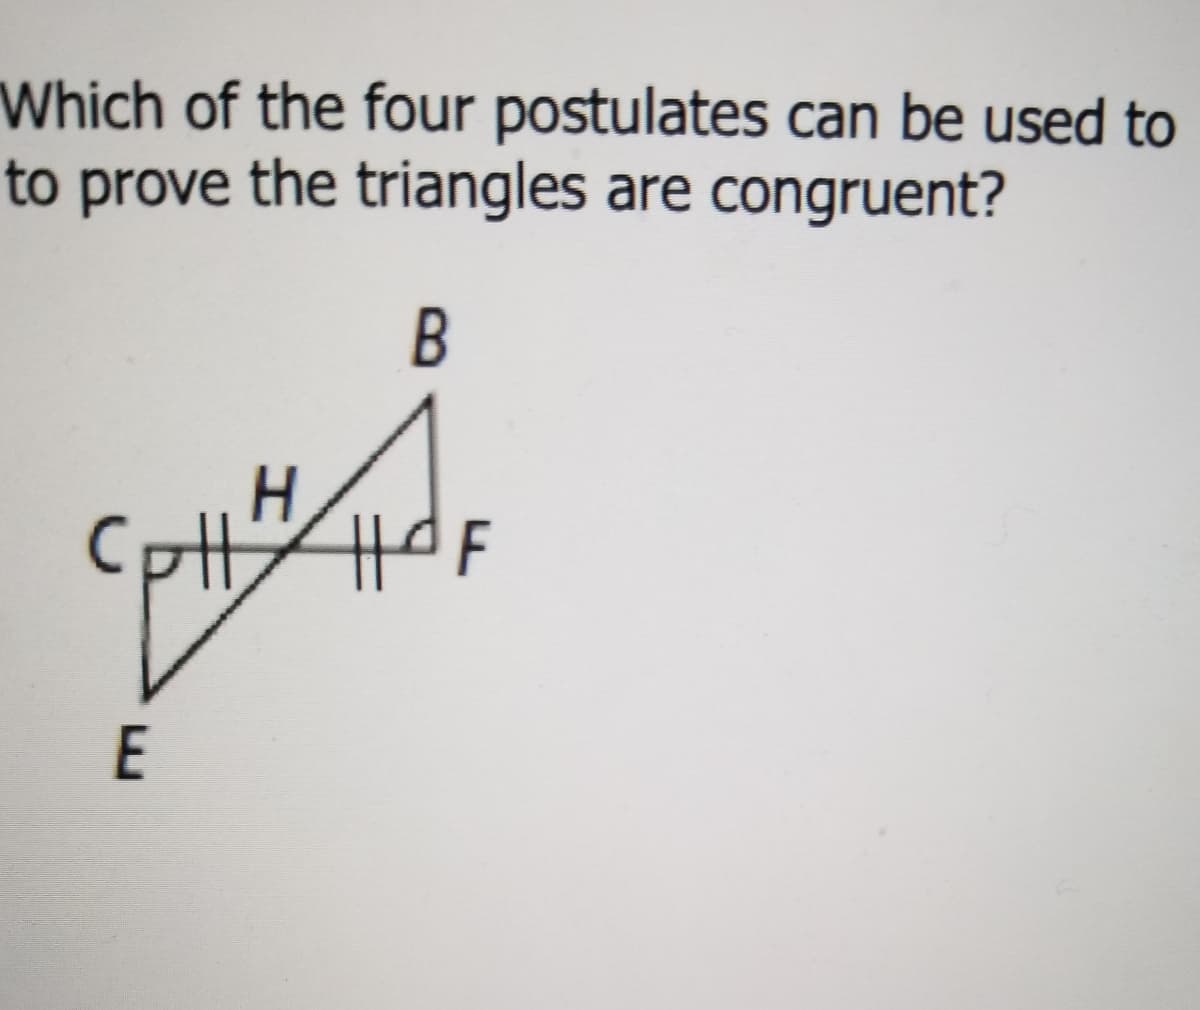 Which of the four postulates can be used to
to prove the triangles are congruent?
B
H.
CptH
E
